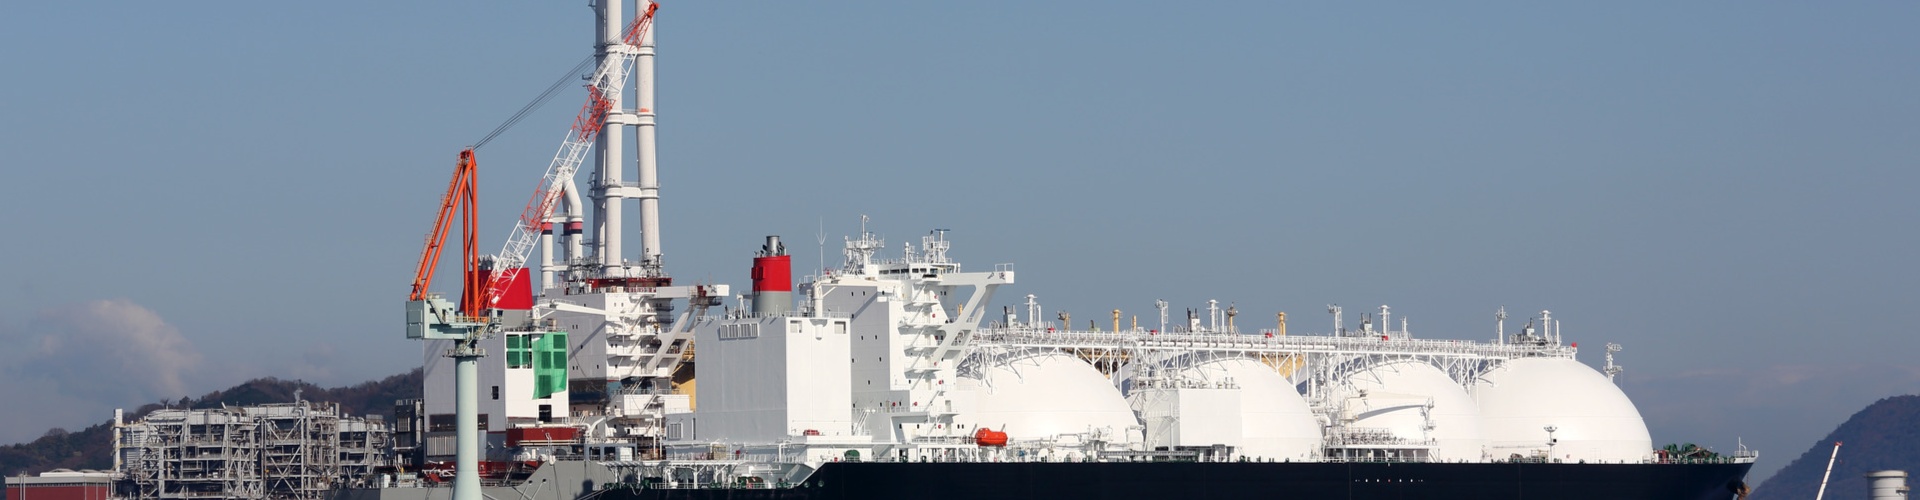 Photo of a LNG LPG cargo ship docked in port